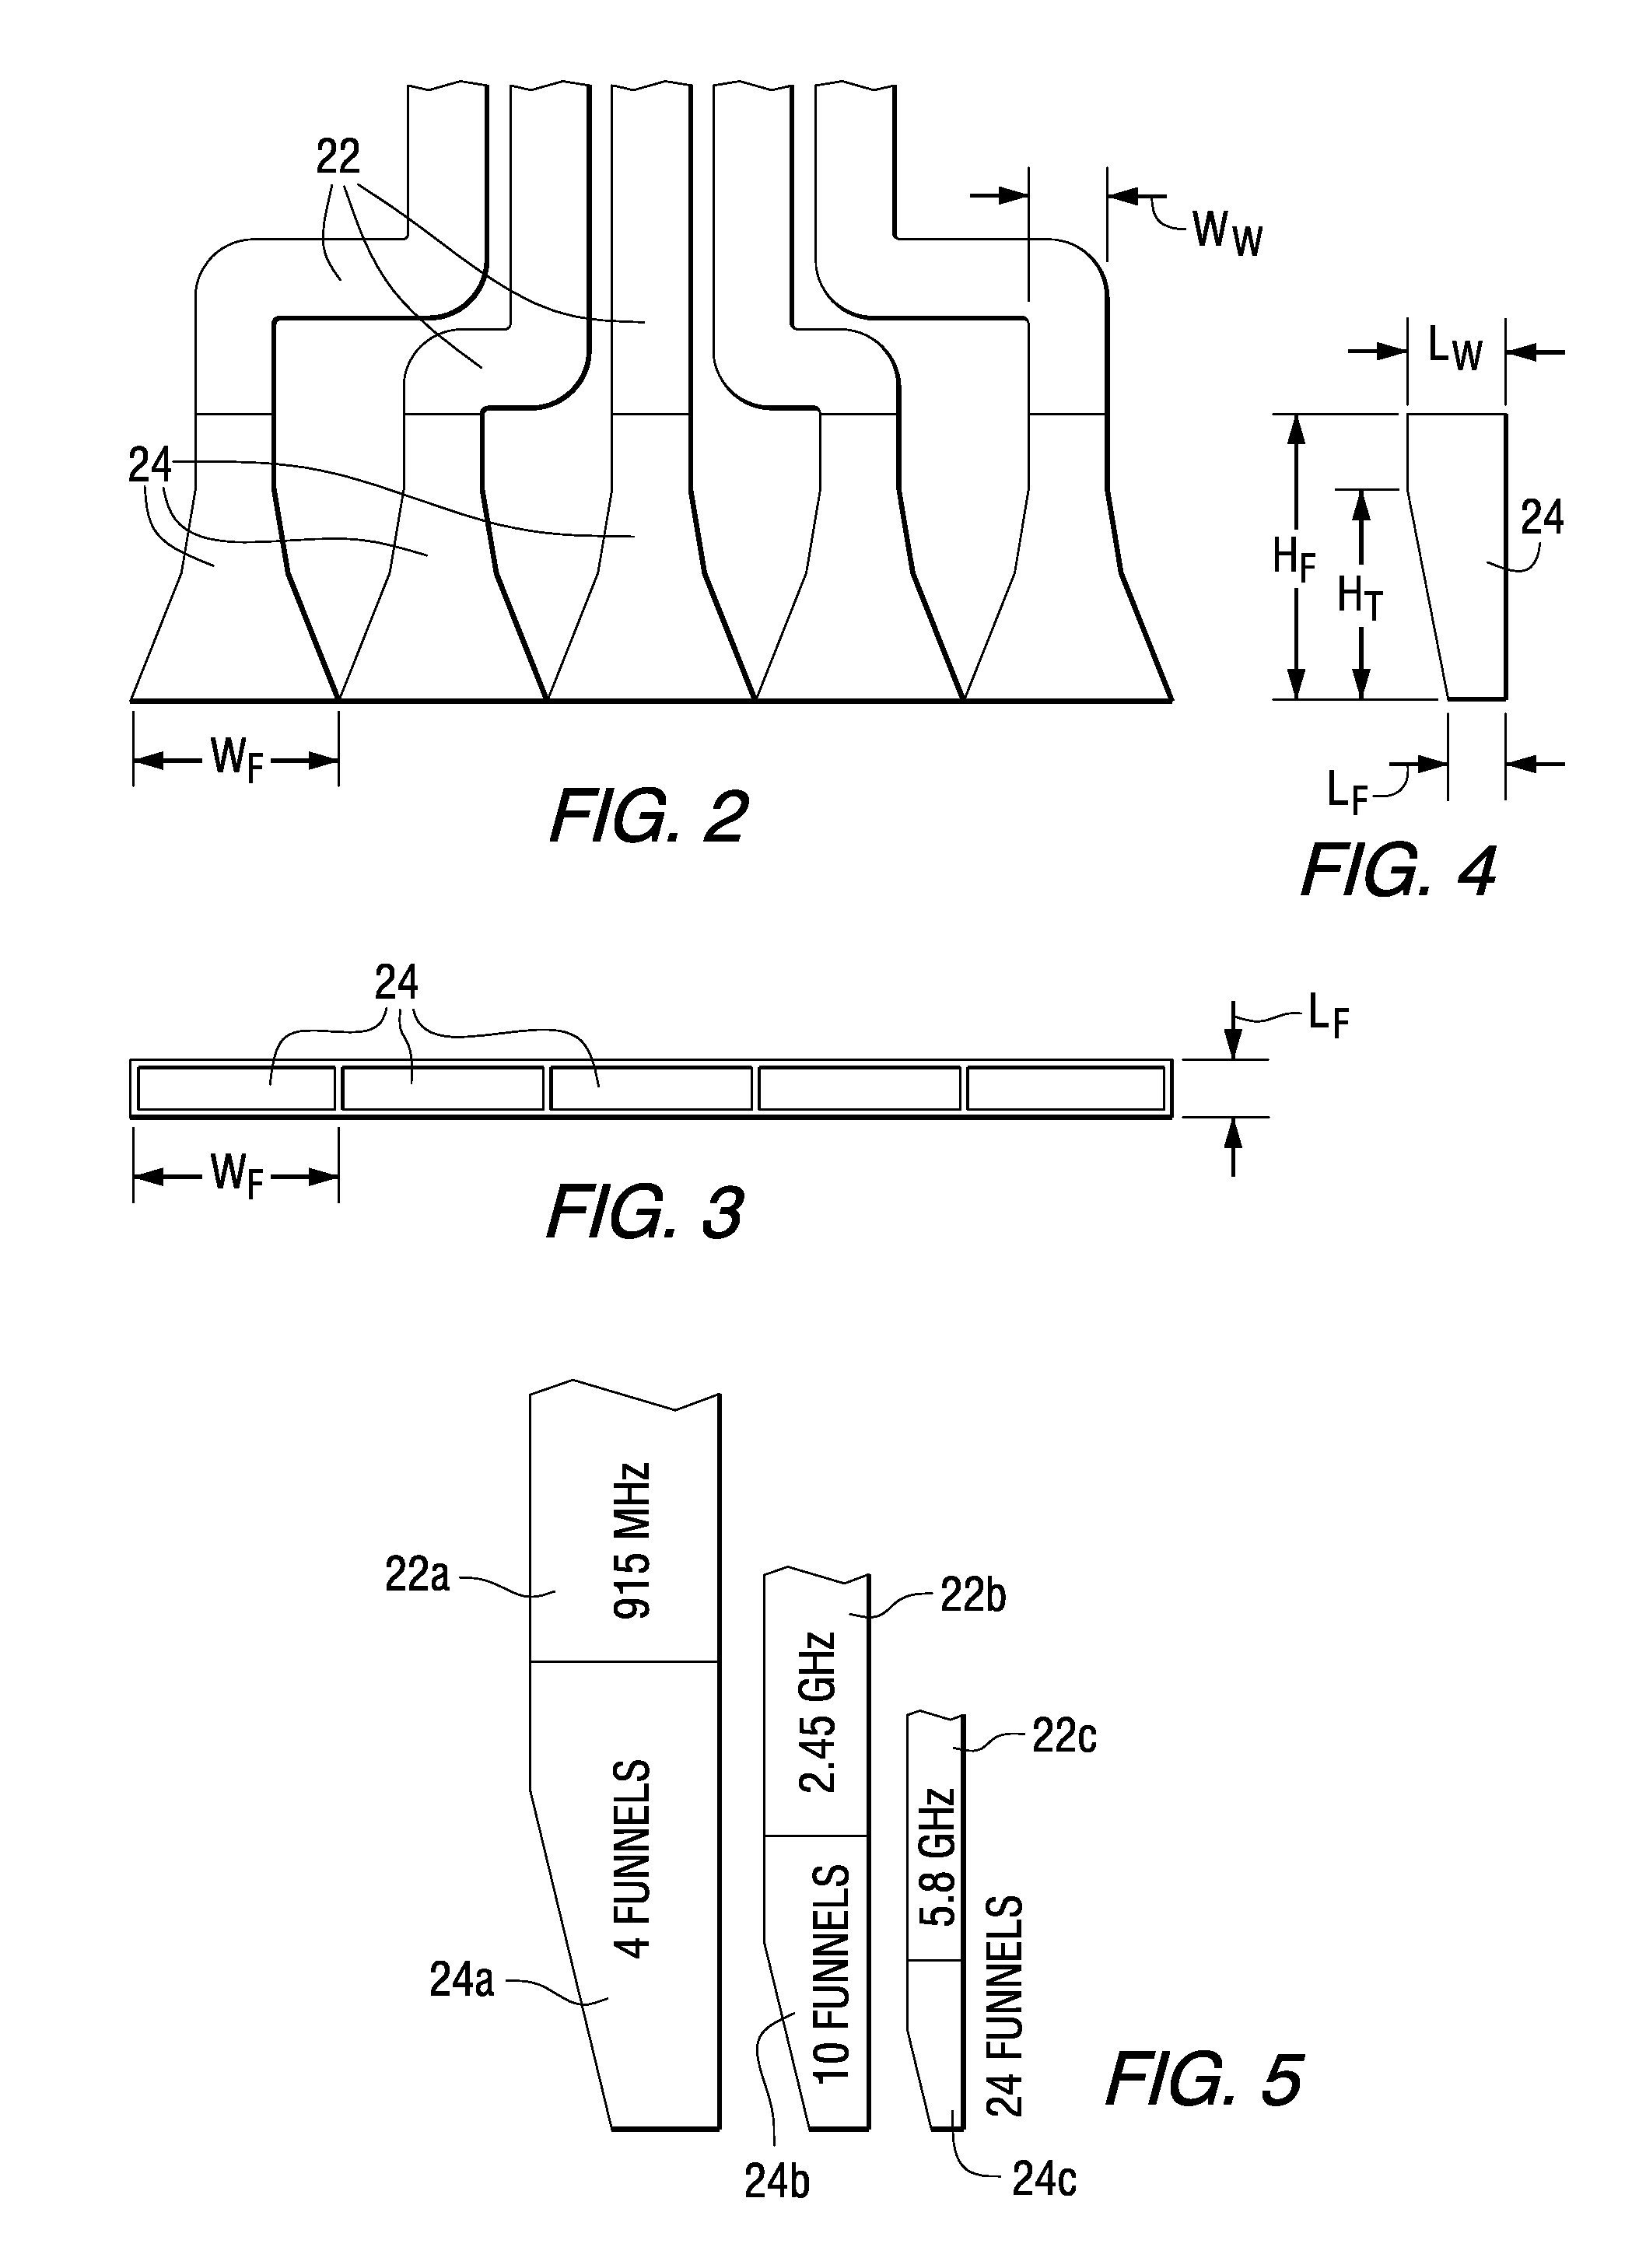 Apparatus for in-situ microwave consolidation of planetary materials containing nano-sized metallic iron particles